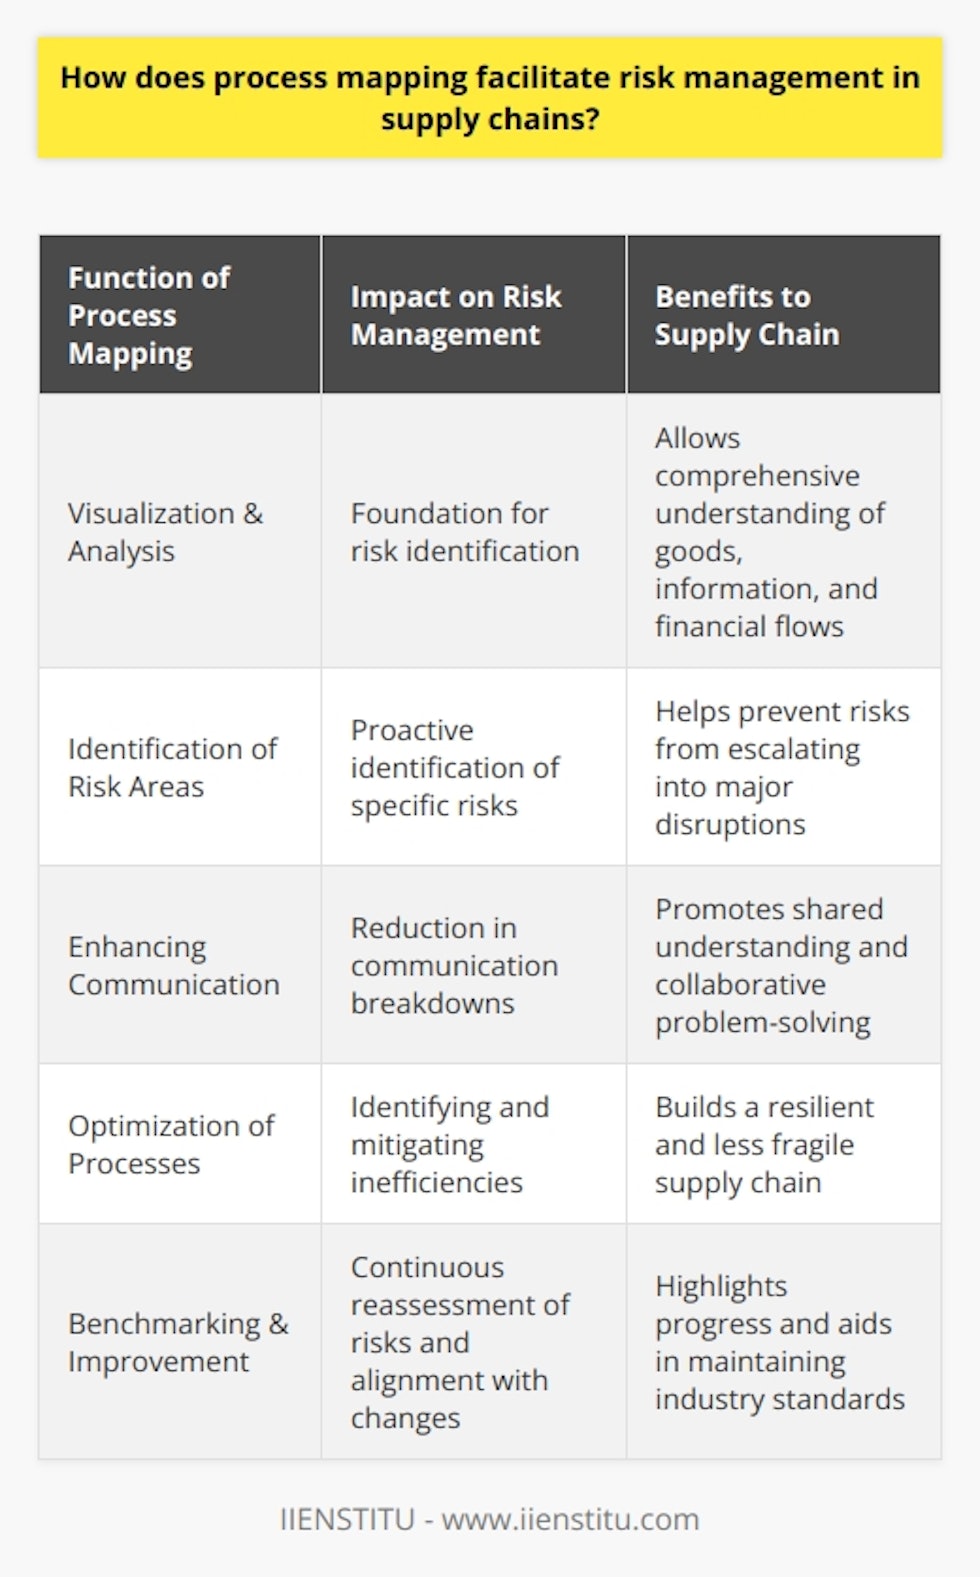 Process mapping, an essential tool in the management of supply chains, acts as a powerful instrument for risk management. It offers organizations a systematic approach to visualize and analyze the flow of goods, information, and finance in their supply chain operations, which is a foundation for identifying and addressing potential risks.**Identification of Risk Areas**The primary importance of process mapping lies in its ability to illuminate risk areas across the supply chain. By methodically breaking down each stage – from procurement to delivery – it becomes possible to scrutinize each part for specific risks such as delays, quality issues, or supplier reliability. This granular approach supports the proactive identification of risk factors before they escalate into major disruptions.**Enhancing Communication and Collaboration**In complex supply chain structures, communication breakdowns can be as debilitating as physical supply chain disruptions. A well-crafted process map simplifies complex systems, facilitating better communication and shared understanding among all parties involved. Enhanced collaboration prompted by a common visual language can lead to identifying risks that might have been missed in siloed environments.**Optimization of Supply Chain Processes**Identifying risks alone is not sufficient; effective risk management also involves taking steps to mitigate identified risks. Process mapping can reveal inefficiencies and redundancies that contribute to supply chain fragility. By addressing these issues through optimization, automation, or reengineering, organizations can build a more resilient supply chain less susceptible to risks.**Benchmarking Performance and Continuous Improvement**An often-overlooked advantage of process mapping is its role in benchmarking and continuous improvement. By establishing clear baselines, supply chains can be measured against industry standards or past performances to highlight progress and persistent vulnerabilities. This continuous reassessment ensures that risk management strategies are not static, aligning with evolving threats and organizational change.In essence, process mapping is a strategic boon for organizations seeking to manage risks in their supply chains efficiently. It provides a detailed and actionable framework which helps in identifying risk areas, improving collaboration, optimizing operations, and constantly refining supply chain resilience. Organizations like IIENSTITU, focusing on education and organizational development, underscore the value of such tools in today's increasingly complex and interconnected global supply chains, equipping professionals with the skills to effectively manage and mitigate risks.